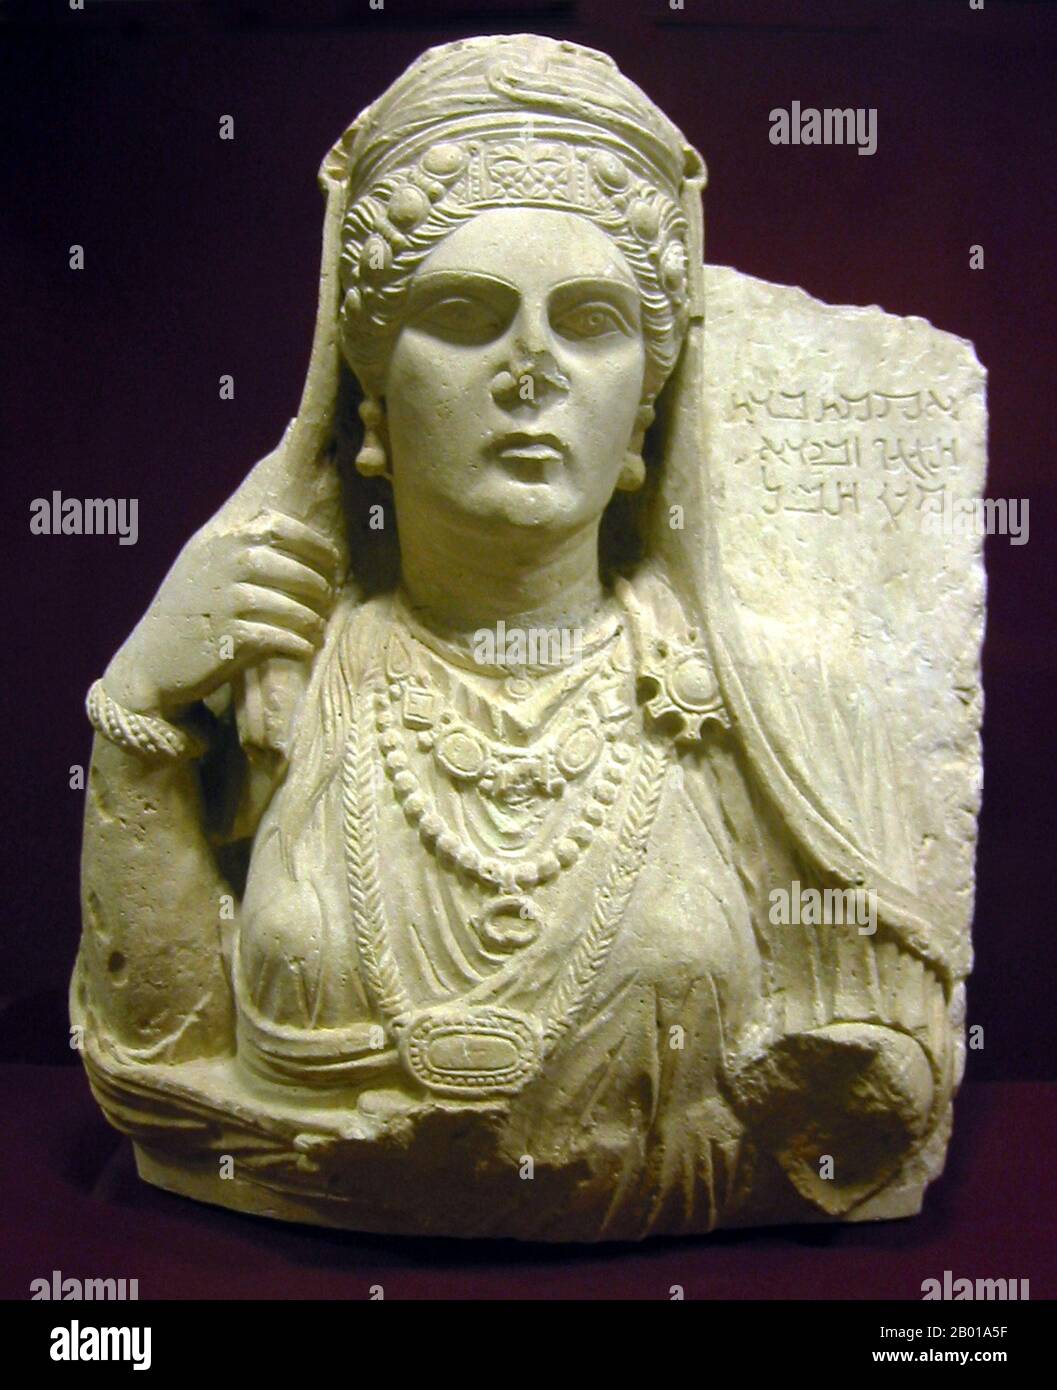 Syria: Funerary bust of a noblewoman of Palmyra, 2nd century CE. Photo by PHGCOM (CC BY-SA 3.0 License).  Funerary bust of Aqmat, daughter of Hagagu, descendant of Zebida, descendant of Ma'an, with Palmyrenian inscription. Stock Photo